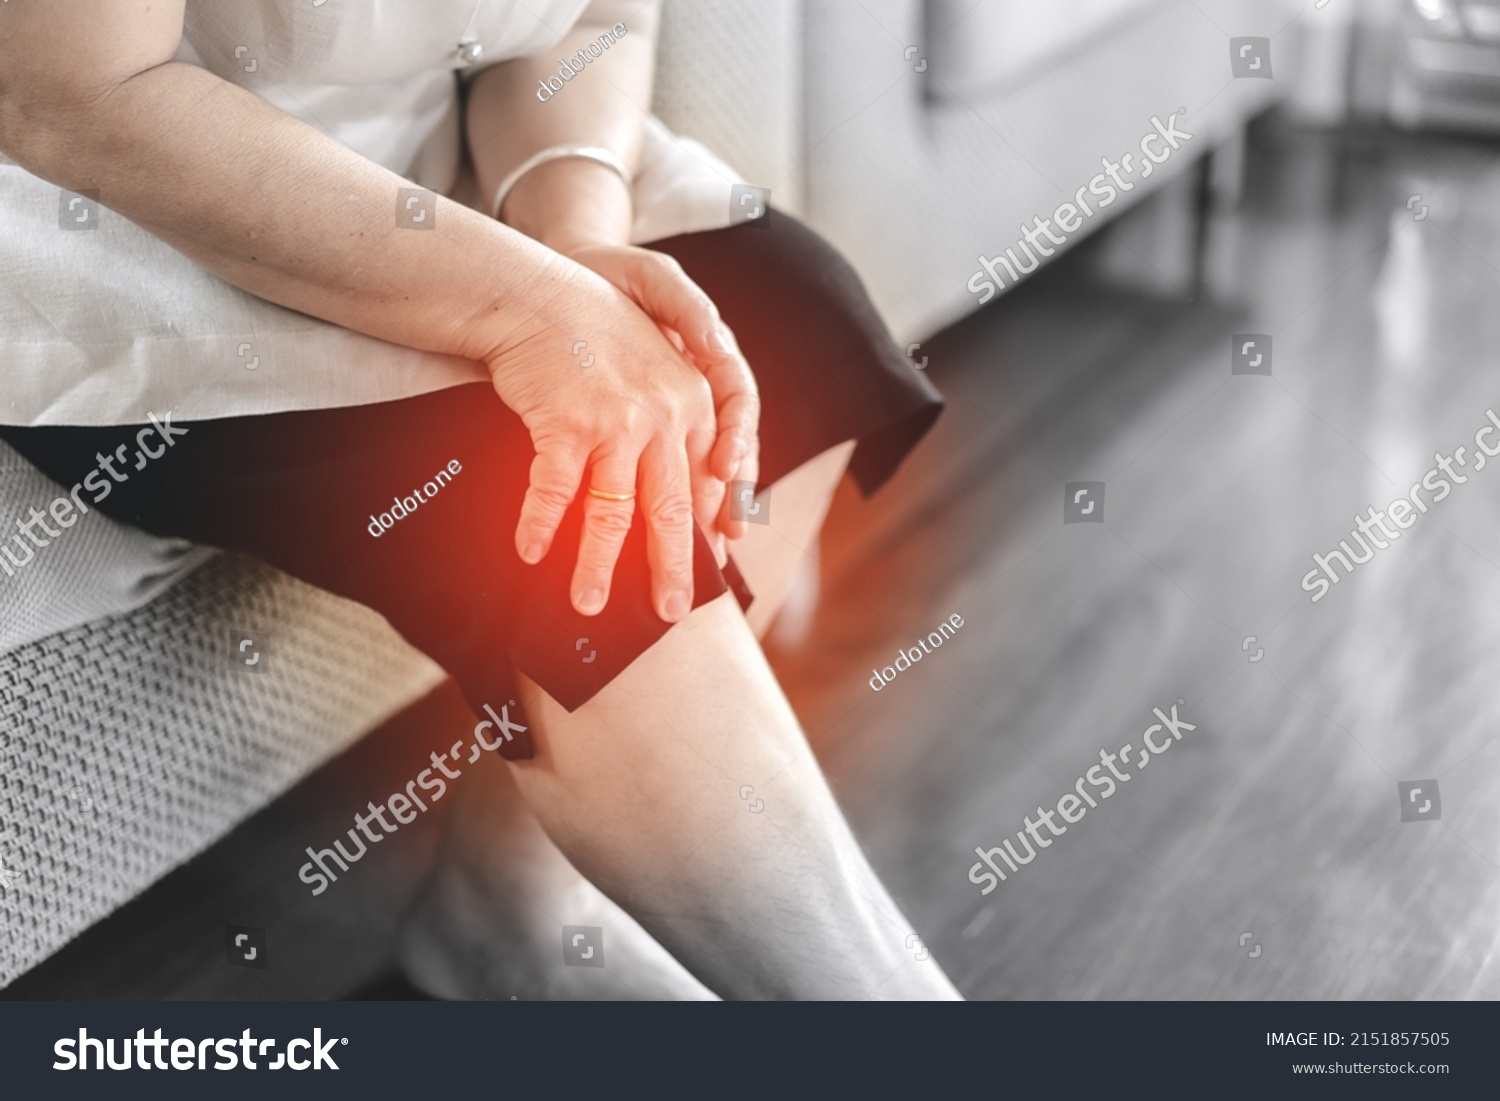 Old people stay alone at home has injury concept. Asian elderly woman has knee osteoarthritis pain. #2151857505